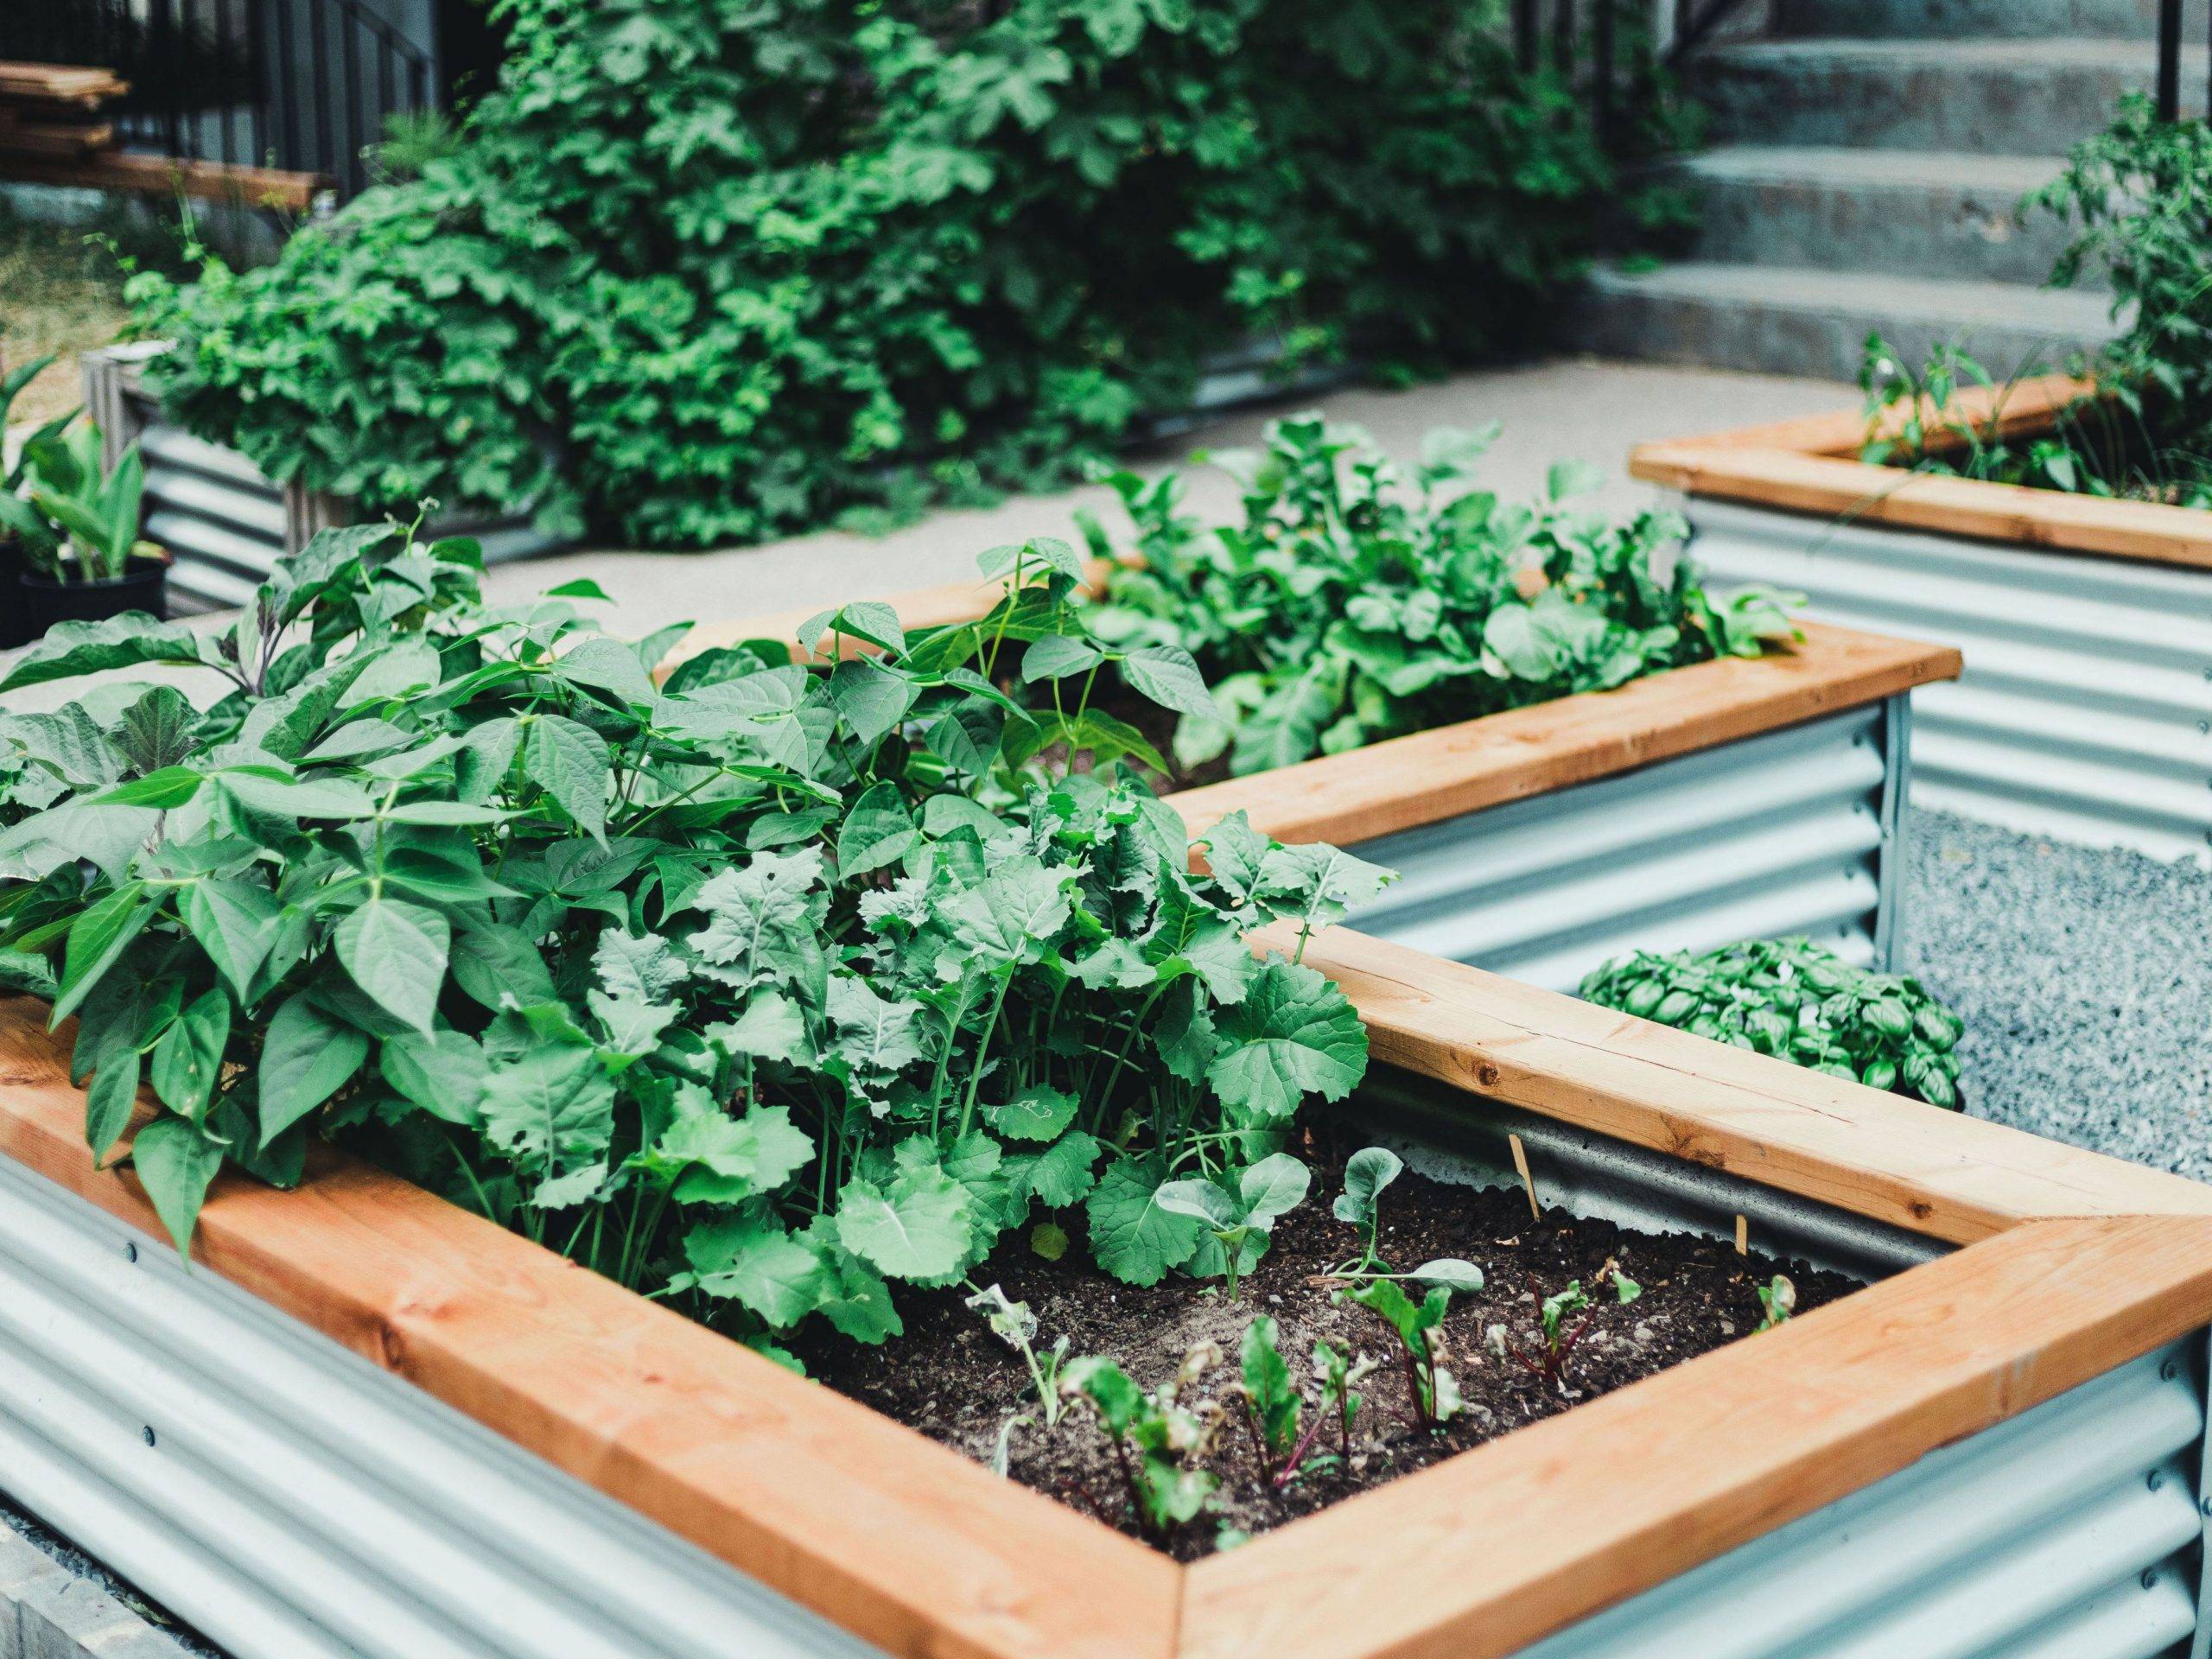 Awesome Diy Raised Garden Bed Plans